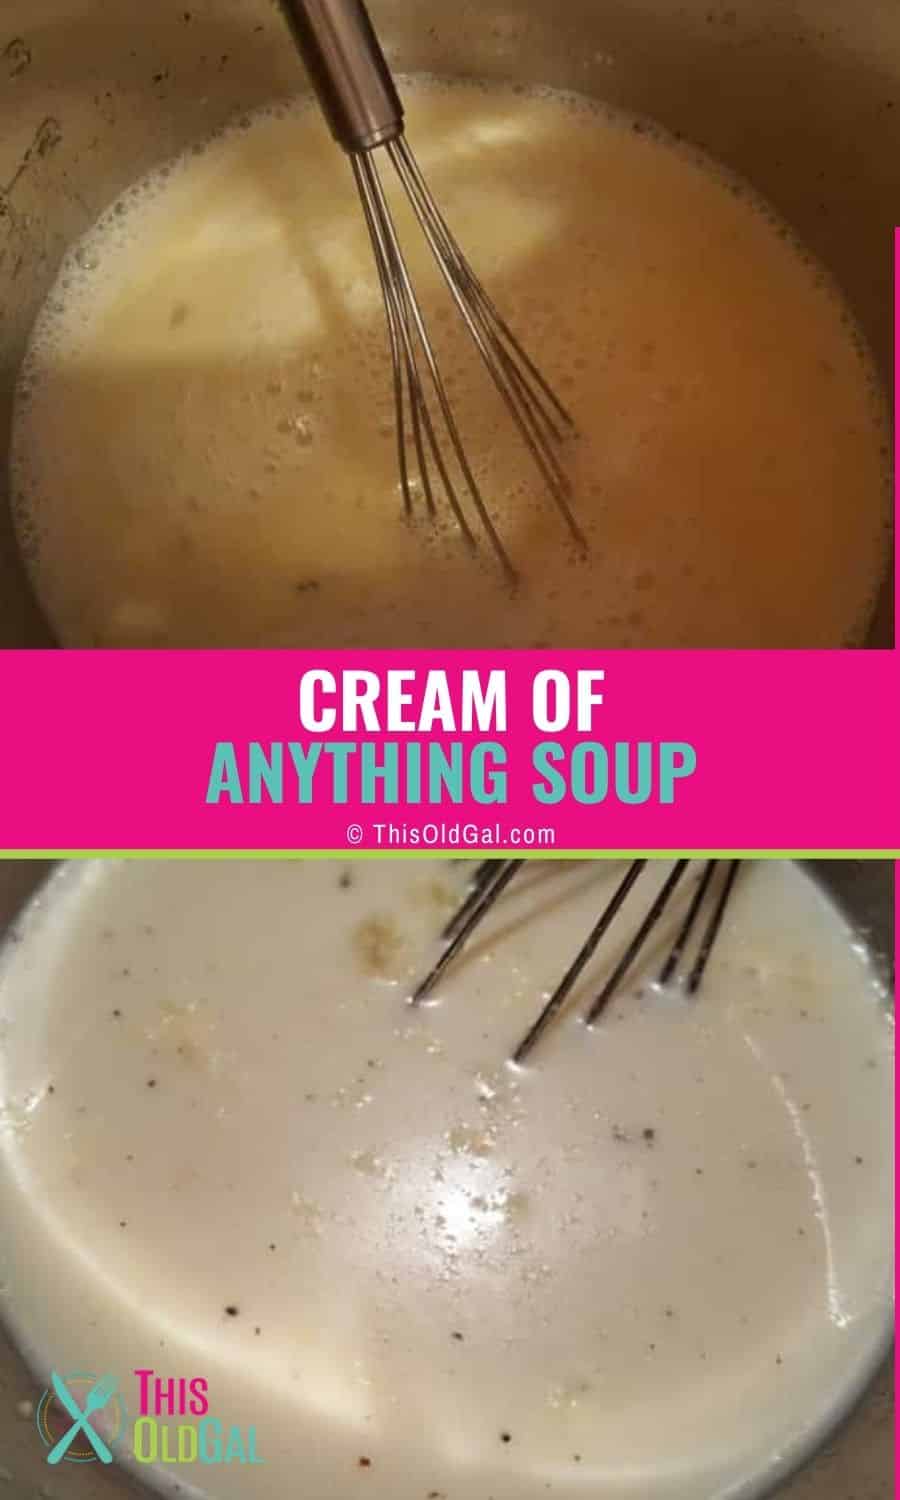 Images of the pots with cream of anything soup in them